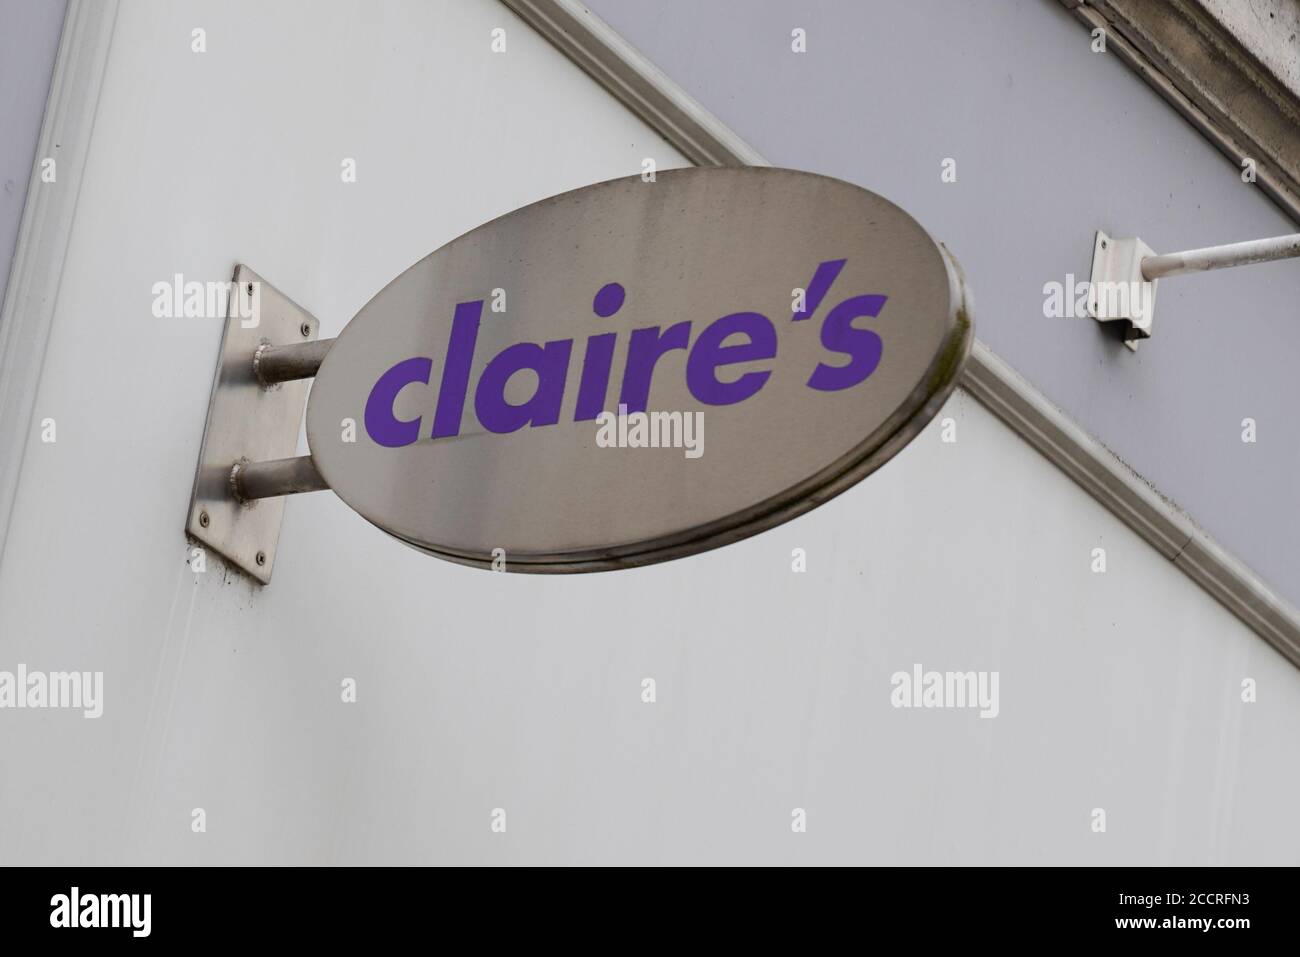 Bordeaux , Aquitaine / France - 08 20 2020 : claires text sign and logo of Claire's front of shop retailer of accessories and jewelry girls and women Stock Photo